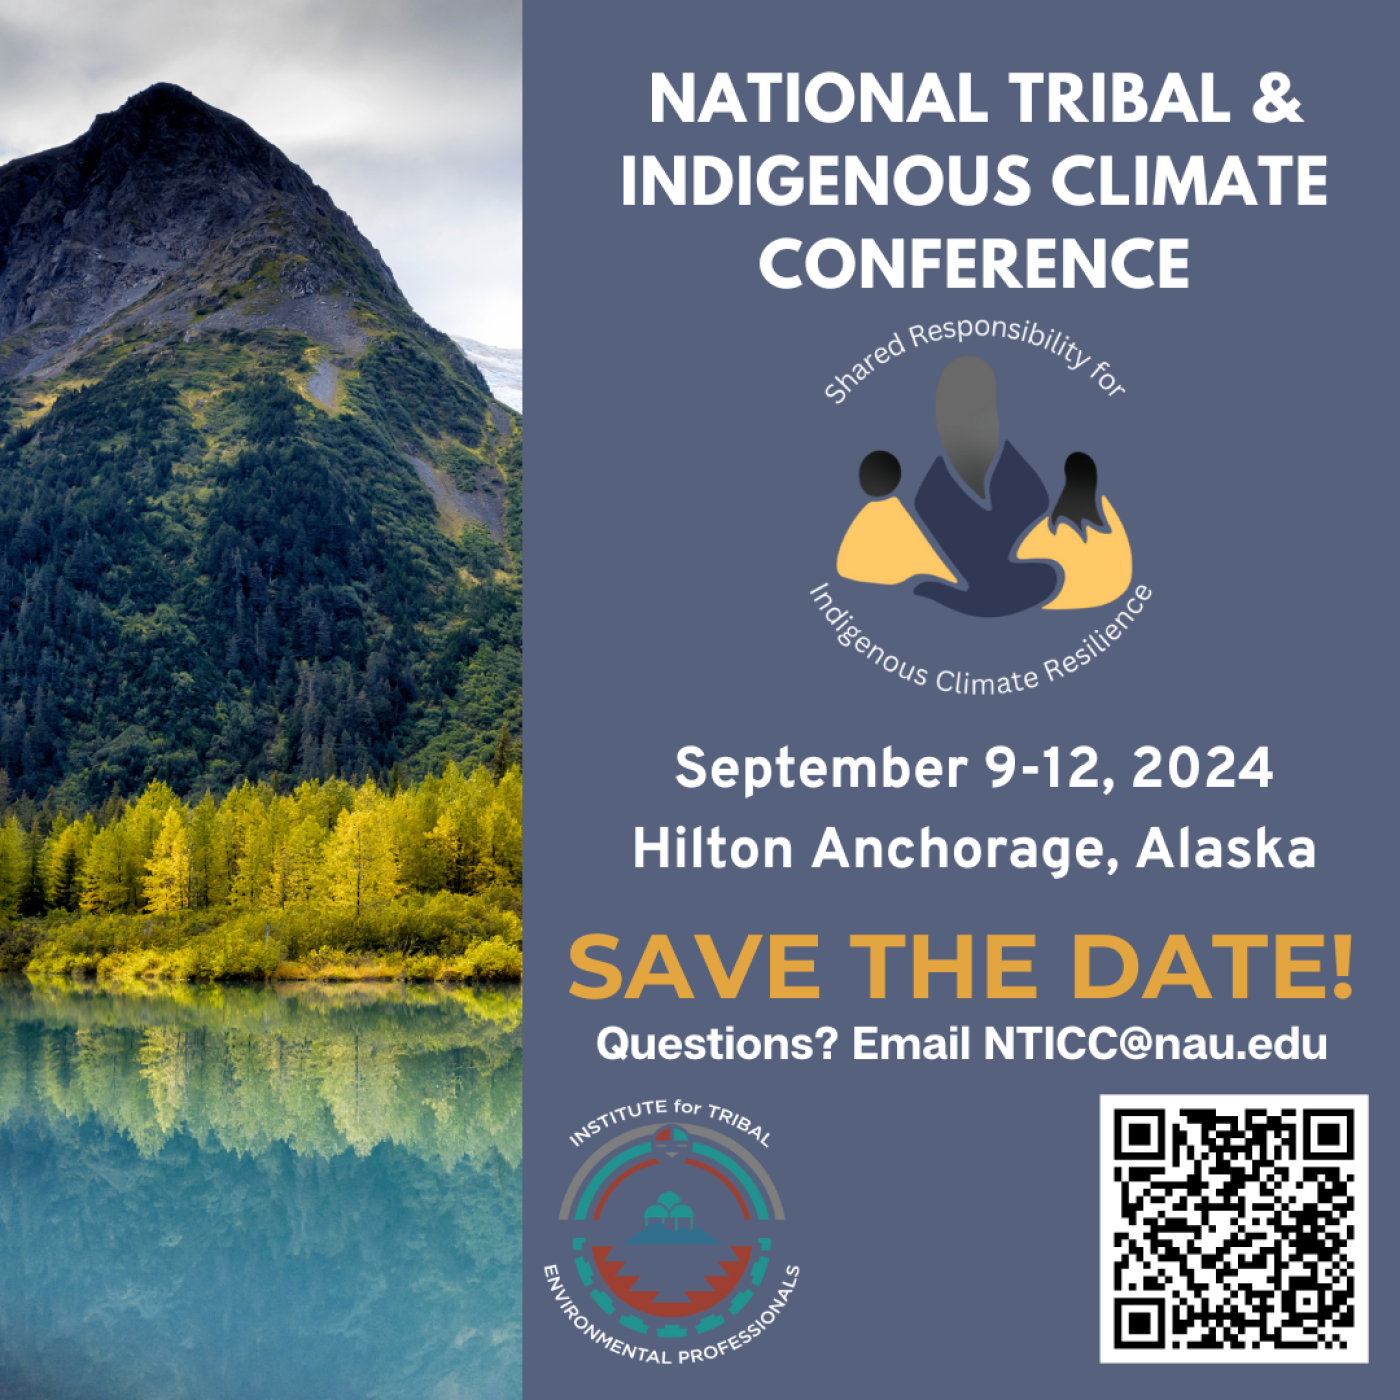 National Tribal and Indigenous Climate Conference: "Shared Responsibility for Indigenous Climate Resilience.” September 9-12, 2024 at the Hilton Anchorage, Alaska. Save the Date! Questions? Email NTICC@nau.edu.